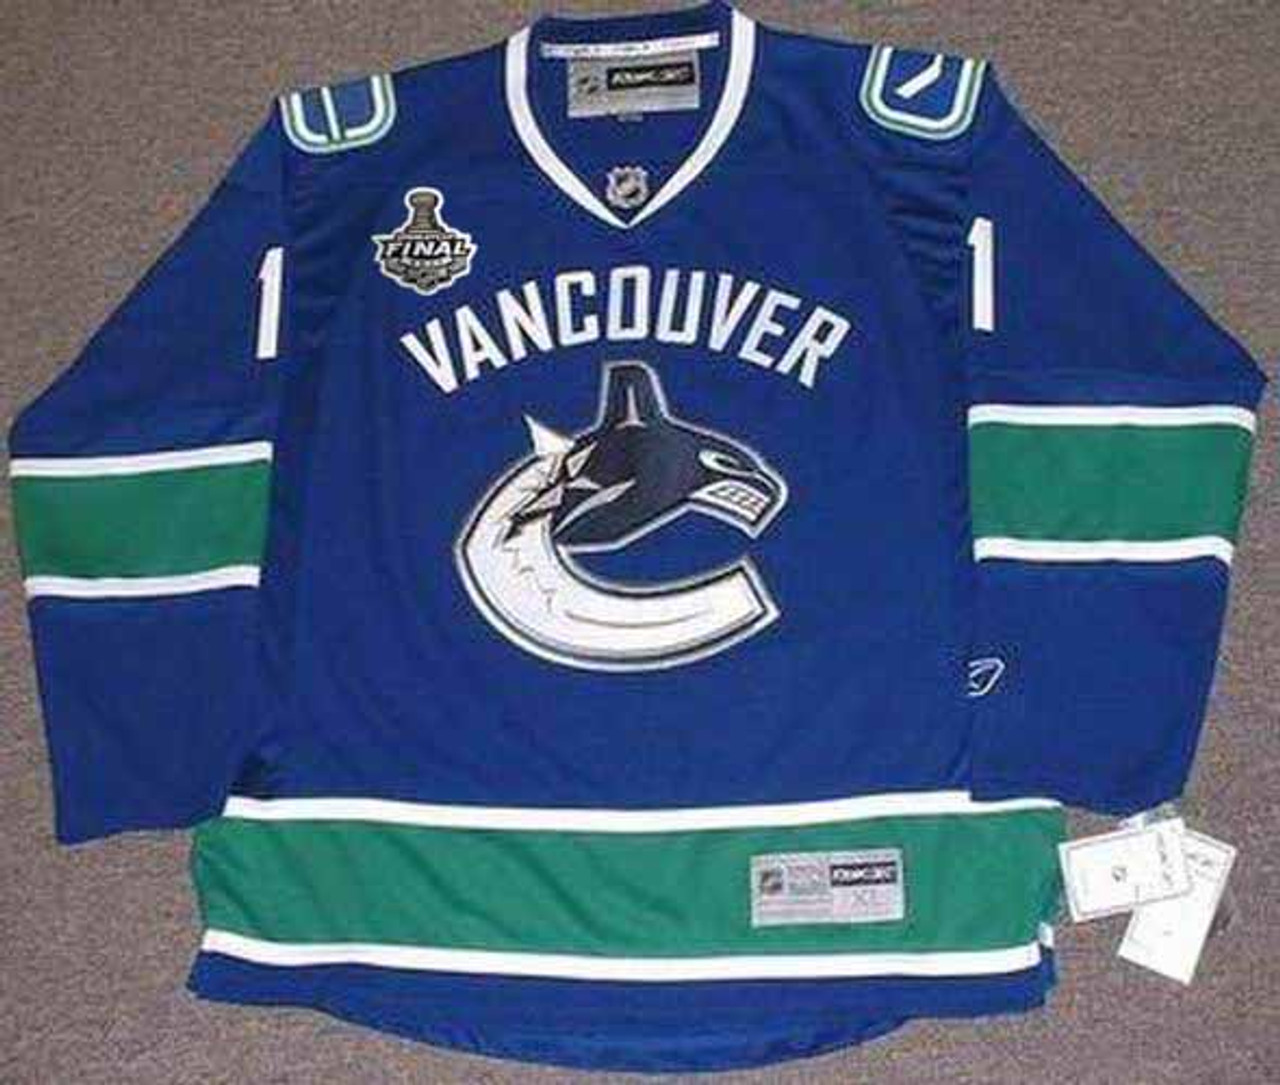 Vancouver Canucks #1 Roberto Luongo Black Ice Jersey on sale,for